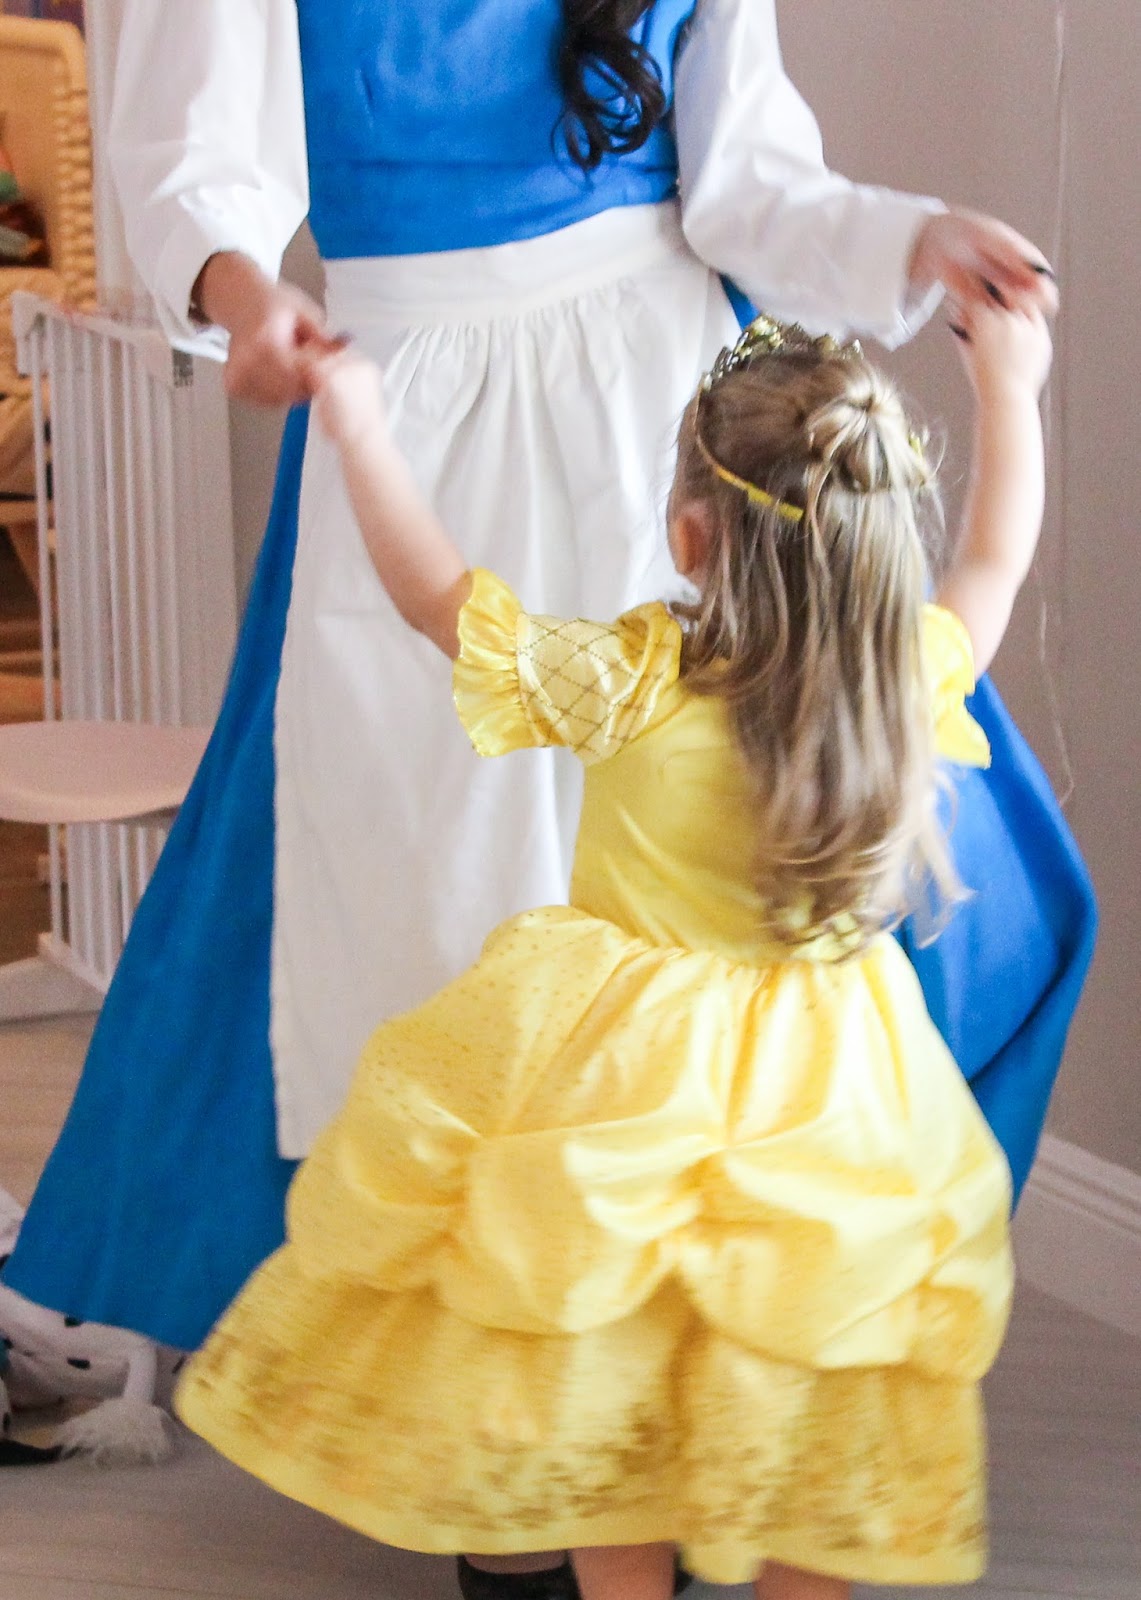 Beauty and the Beast Garden Party by popular party planning blogger Celebration Stylist